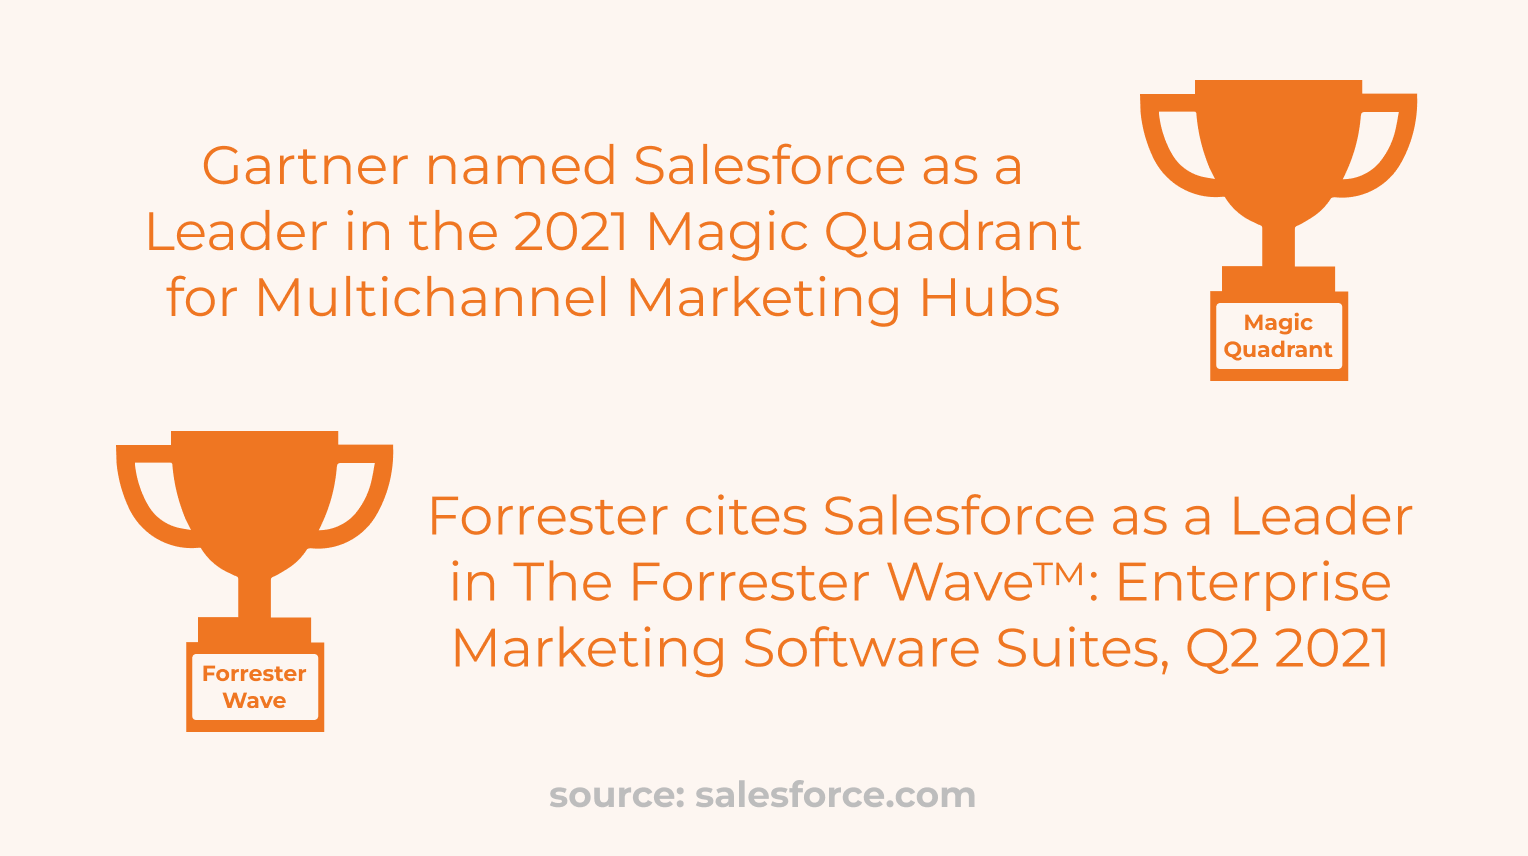 Salesforce is a top name in multichannel marketing